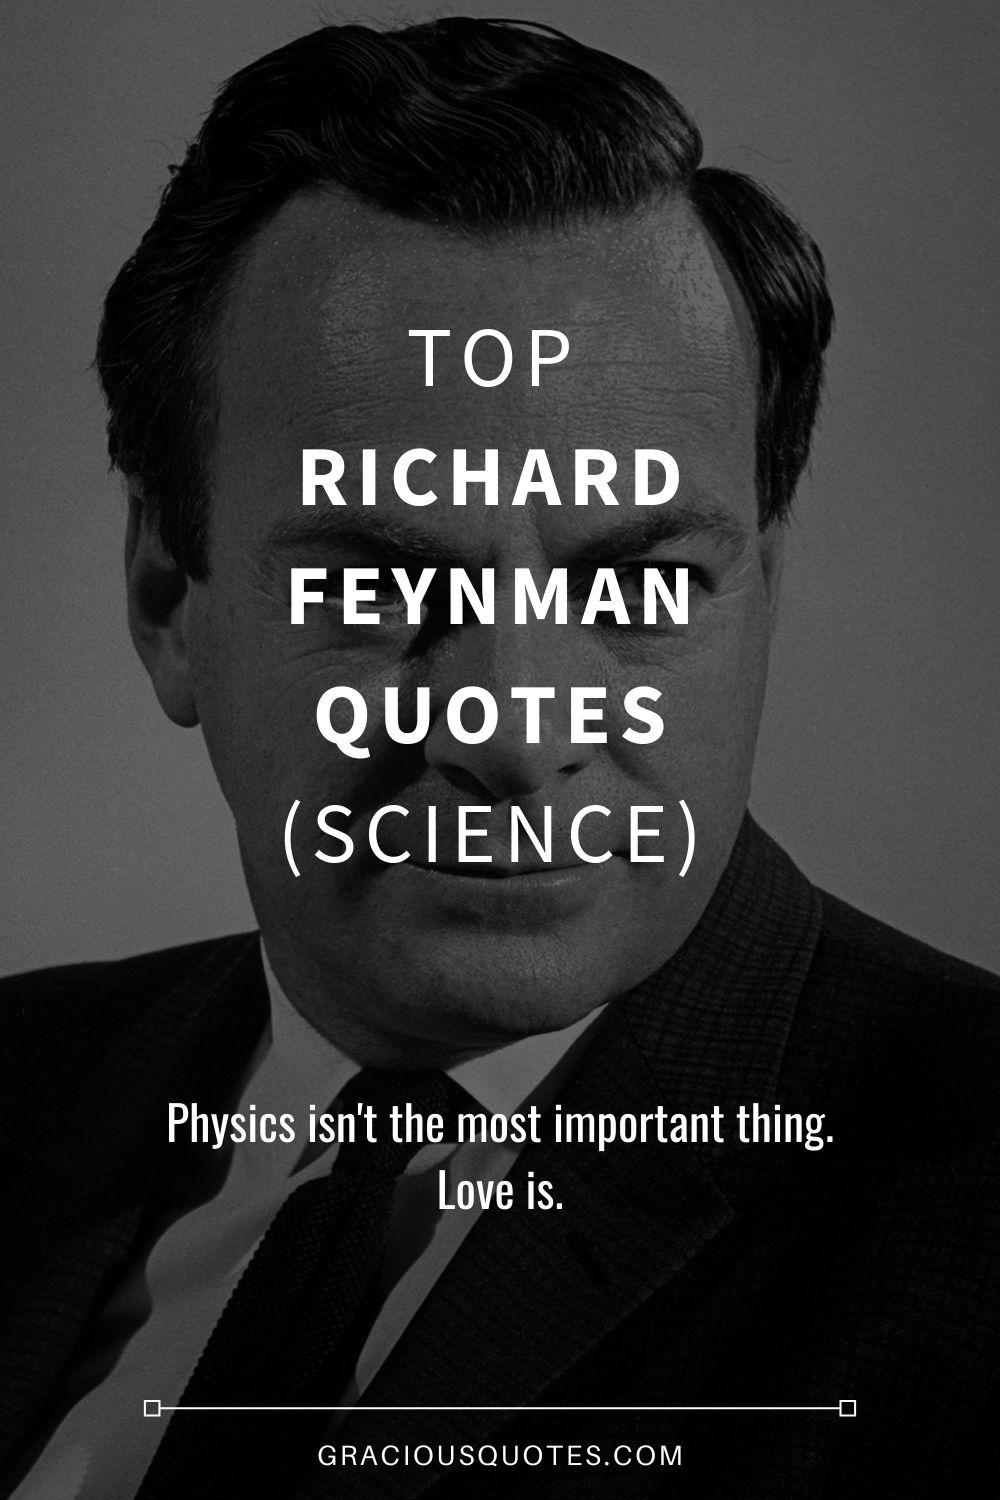 Top Richard Feynman Quotes (SCIENCE) - Gracious Quotes